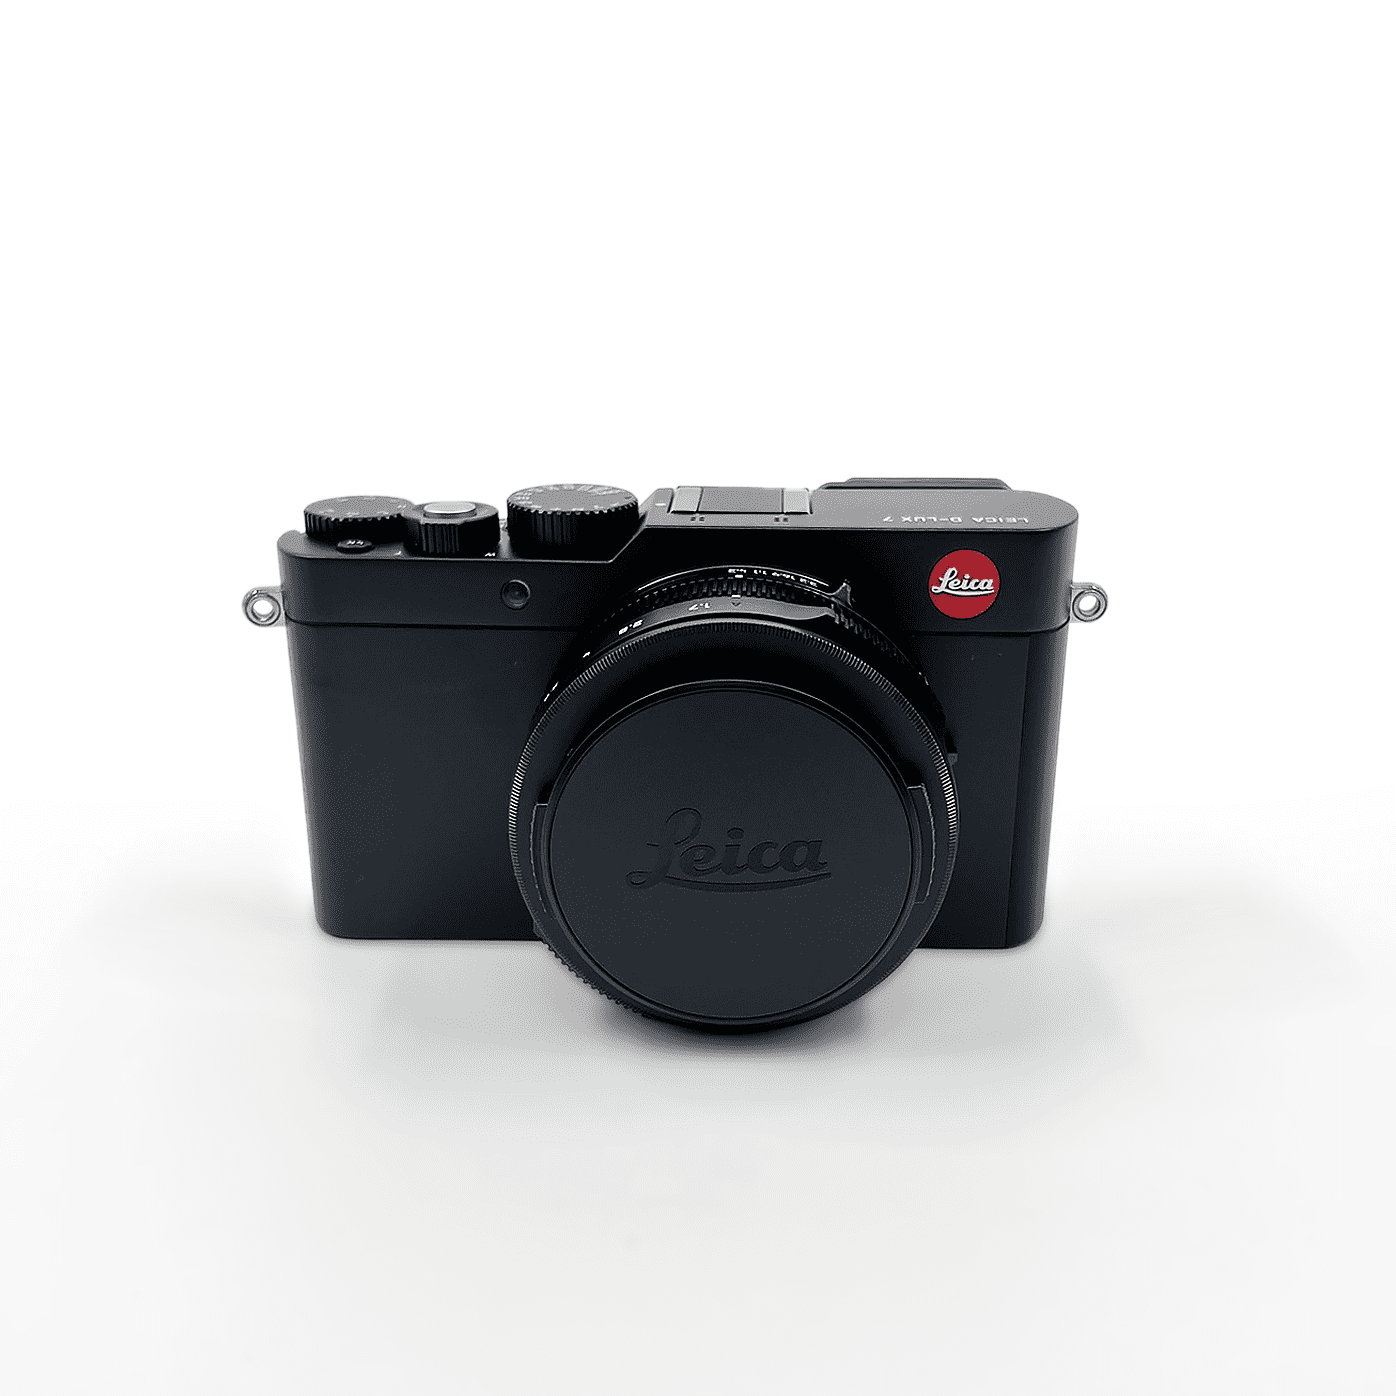 Leica D - Lux 7 Digital Camera (Black) (19141) + 64GB Extreme Pro Card +  Corel Photo Software + Extra Battery + Portable LED Light + Card Reader + 3  Piece Filter Kit + Case and More - Deluxe Bundle 